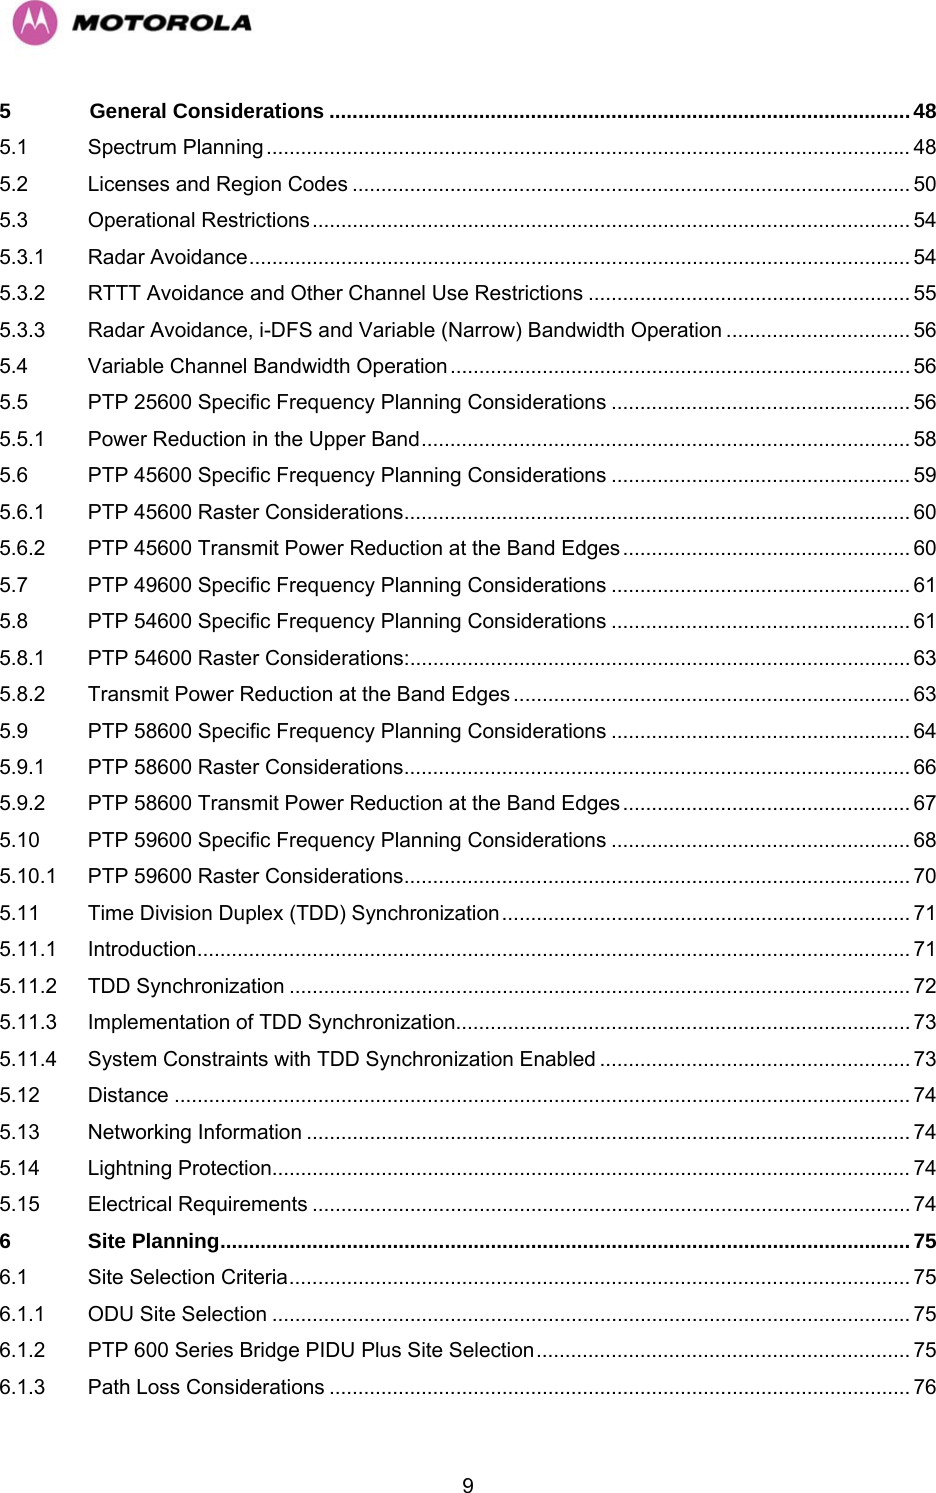   95 General Considerations .....................................................................................................48 5.1 Spectrum Planning................................................................................................................ 48 5.2 Licenses and Region Codes ................................................................................................. 50 5.3 Operational Restrictions........................................................................................................54 5.3.1 Radar Avoidance................................................................................................................... 54 5.3.2 RTTT Avoidance and Other Channel Use Restrictions ........................................................ 55 5.3.3 Radar Avoidance, i-DFS and Variable (Narrow) Bandwidth Operation ................................ 56 5.4 Variable Channel Bandwidth Operation................................................................................ 56 5.5 PTP 25600 Specific Frequency Planning Considerations .................................................... 56 5.5.1 Power Reduction in the Upper Band..................................................................................... 58 5.6 PTP 45600 Specific Frequency Planning Considerations .................................................... 59 5.6.1 PTP 45600 Raster Considerations........................................................................................ 60 5.6.2 PTP 45600 Transmit Power Reduction at the Band Edges.................................................. 60 5.7 PTP 49600 Specific Frequency Planning Considerations .................................................... 61 5.8 PTP 54600 Specific Frequency Planning Considerations .................................................... 61 5.8.1 PTP 54600 Raster Considerations:....................................................................................... 63 5.8.2 Transmit Power Reduction at the Band Edges ..................................................................... 63 5.9 PTP 58600 Specific Frequency Planning Considerations .................................................... 64 5.9.1 PTP 58600 Raster Considerations........................................................................................ 66 5.9.2 PTP 58600 Transmit Power Reduction at the Band Edges.................................................. 67 5.10 PTP 59600 Specific Frequency Planning Considerations .................................................... 68 5.10.1 PTP 59600 Raster Considerations........................................................................................ 70 5.11 Time Division Duplex (TDD) Synchronization....................................................................... 71 5.11.1 Introduction............................................................................................................................ 71 5.11.2 TDD Synchronization ............................................................................................................ 72 5.11.3 Implementation of TDD Synchronization............................................................................... 73 5.11.4 System Constraints with TDD Synchronization Enabled ...................................................... 73 5.12 Distance ................................................................................................................................ 74 5.13 Networking Information ......................................................................................................... 74 5.14 Lightning Protection............................................................................................................... 74 5.15 Electrical Requirements ........................................................................................................ 74 6 Site Planning........................................................................................................................75 6.1 Site Selection Criteria............................................................................................................ 75 6.1.1 ODU Site Selection ............................................................................................................... 75 6.1.2 PTP 600 Series Bridge PIDU Plus Site Selection................................................................. 75 6.1.3 Path Loss Considerations ..................................................................................................... 76 